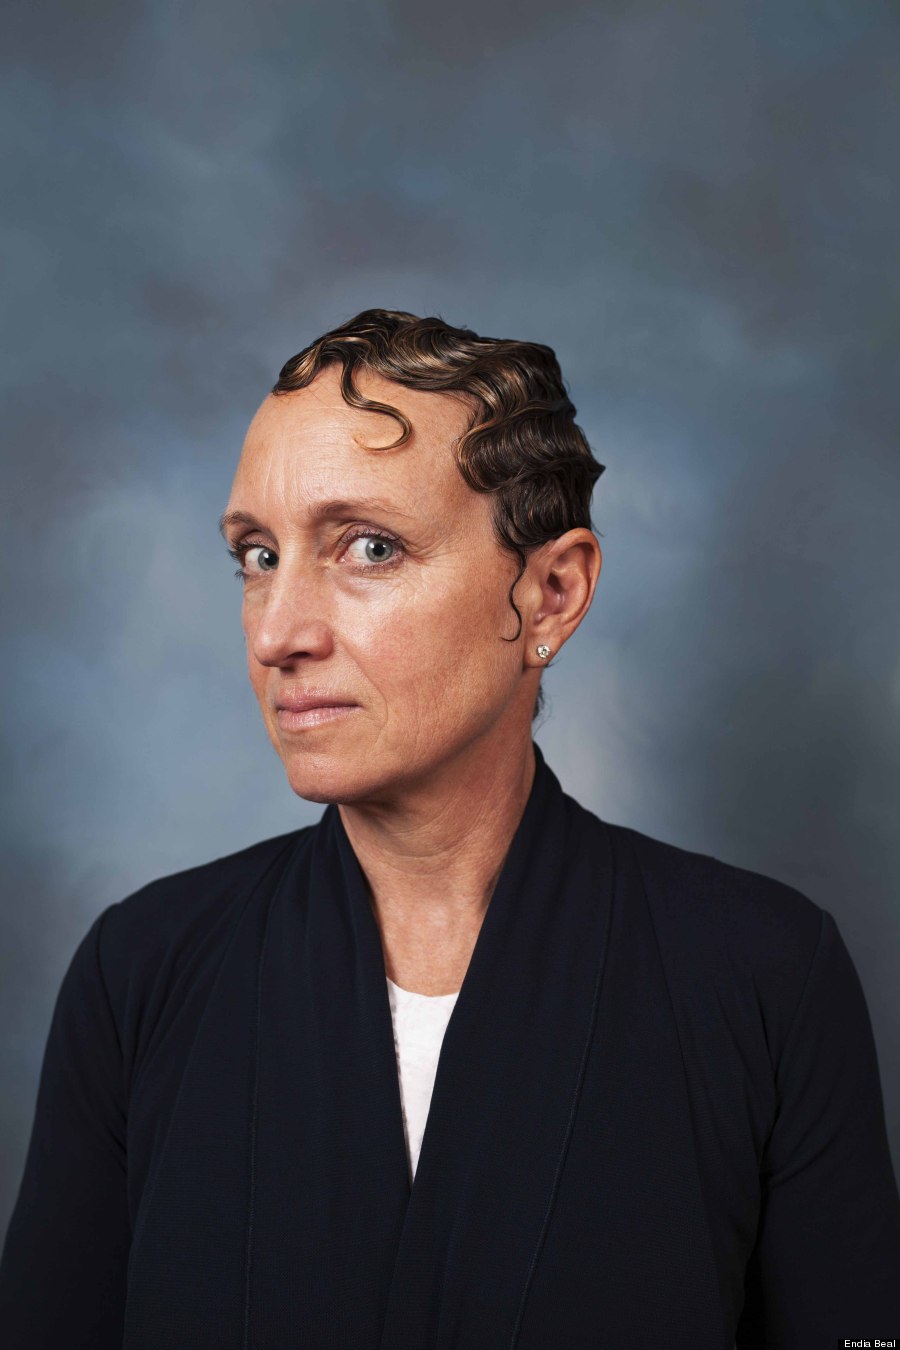 White Women With Black Hairstyles Redefine Corporate America